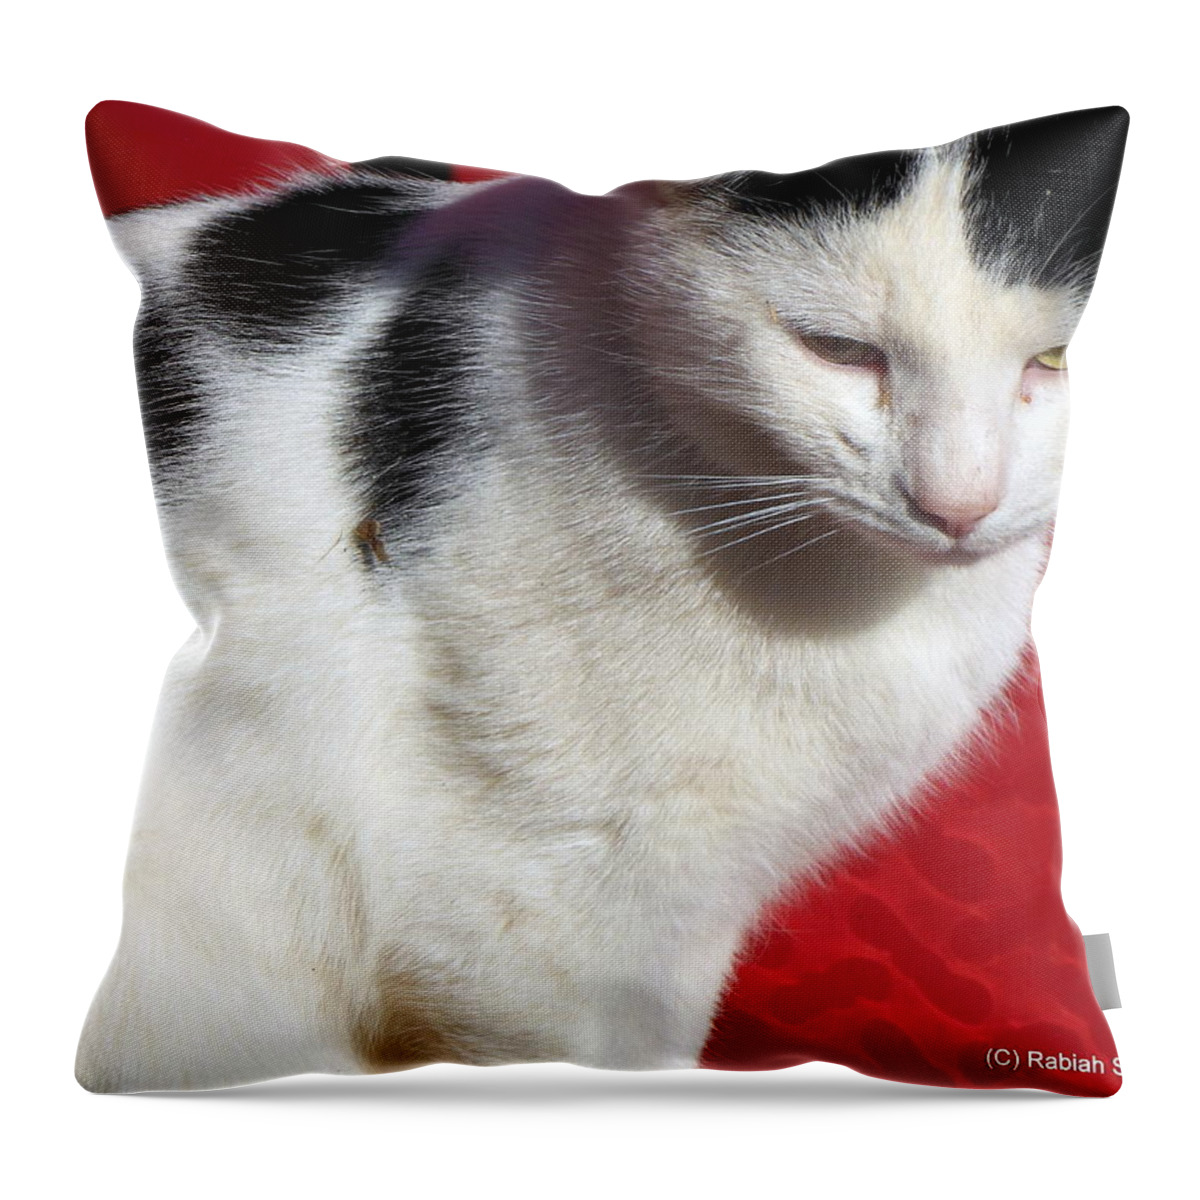 Cats Throw Pillow featuring the photograph Tom Barn Cat by Rabiah Seminole